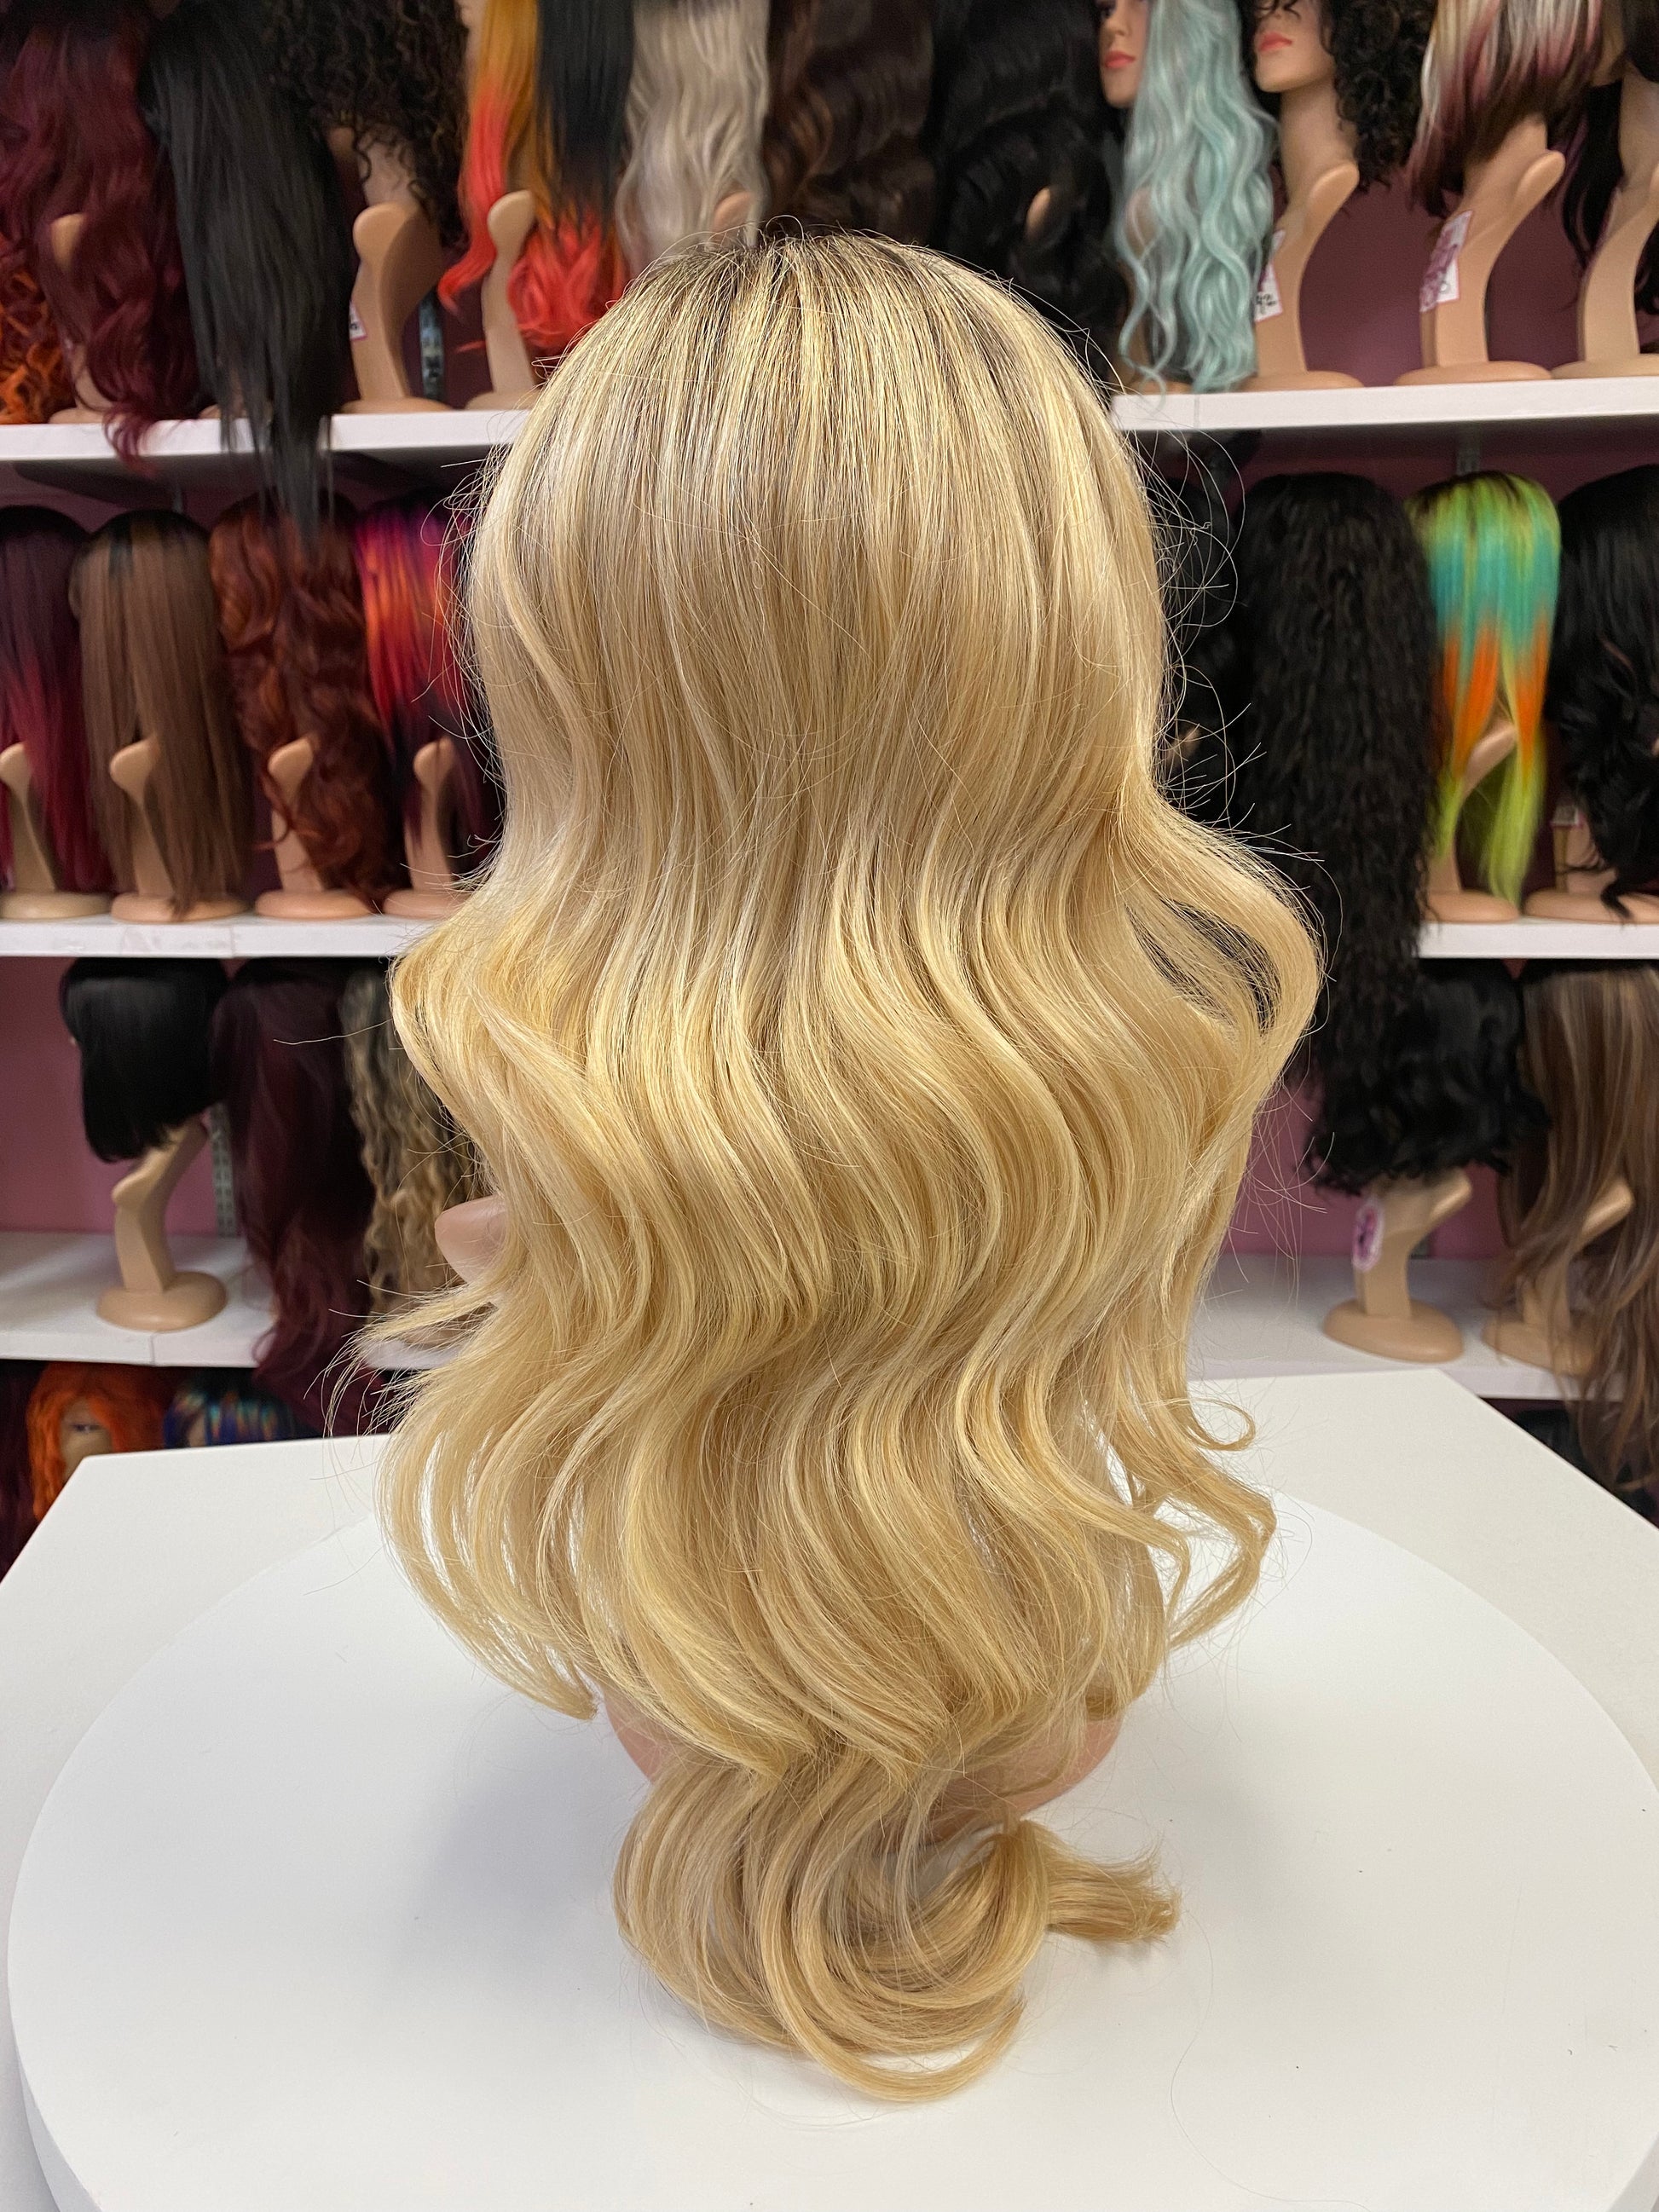 199 Riley - 13x4 Free Part Lace Front Wig - 4/BLONDE - DaizyKat Cosmetics 199 Riley - 13x4 Free Part Lace Front Wig - 4/BLONDE DaizyKat Cosmetics Wigs